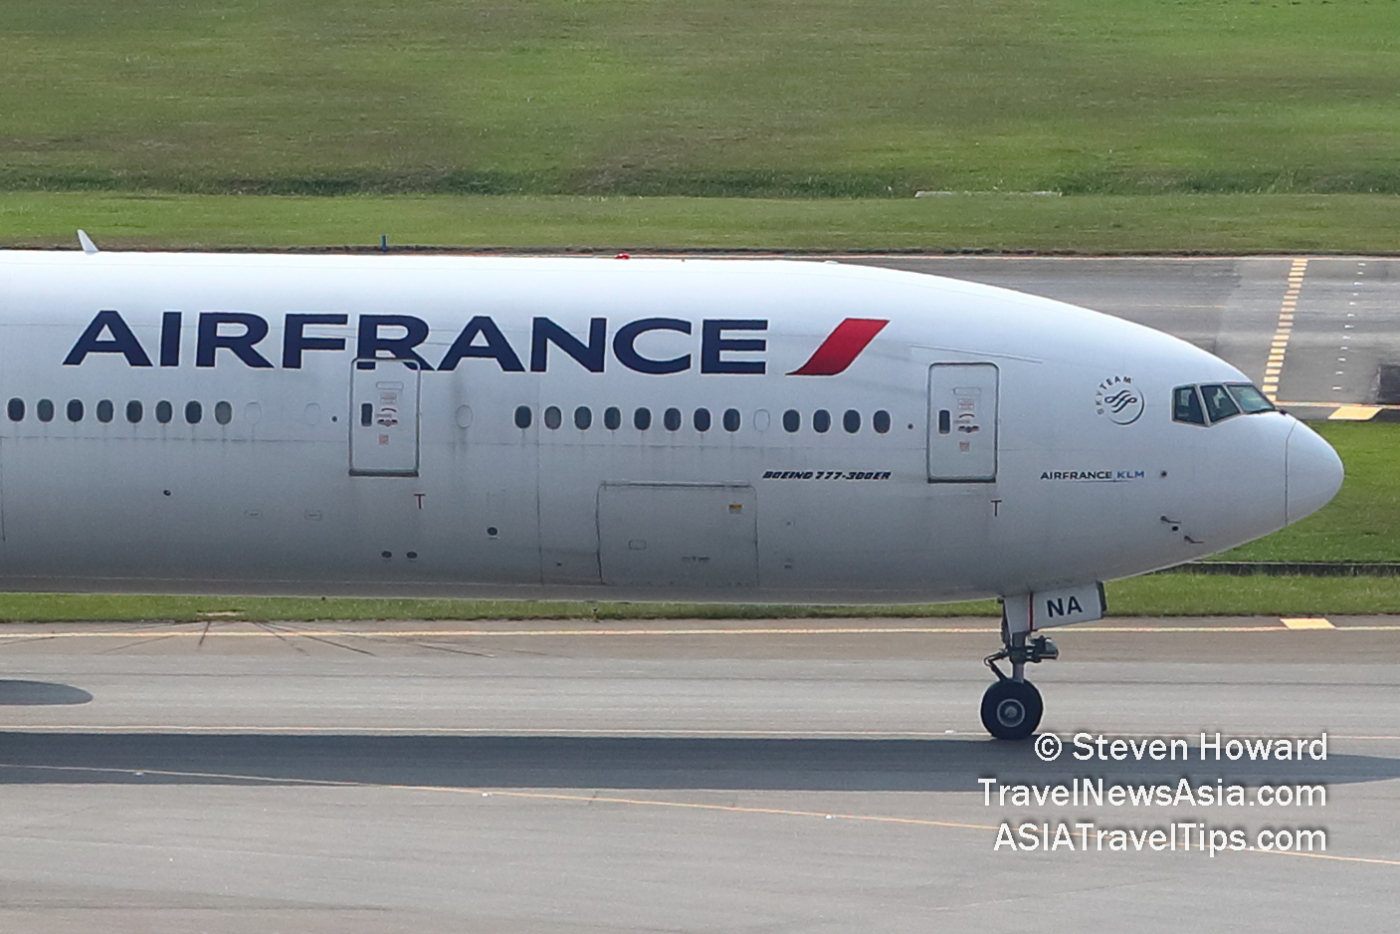 Air France Boeing 777-300ER reg: F-GZNA. Picture by Steven Howard of TravelNewsAsia.com Click to enlarge.